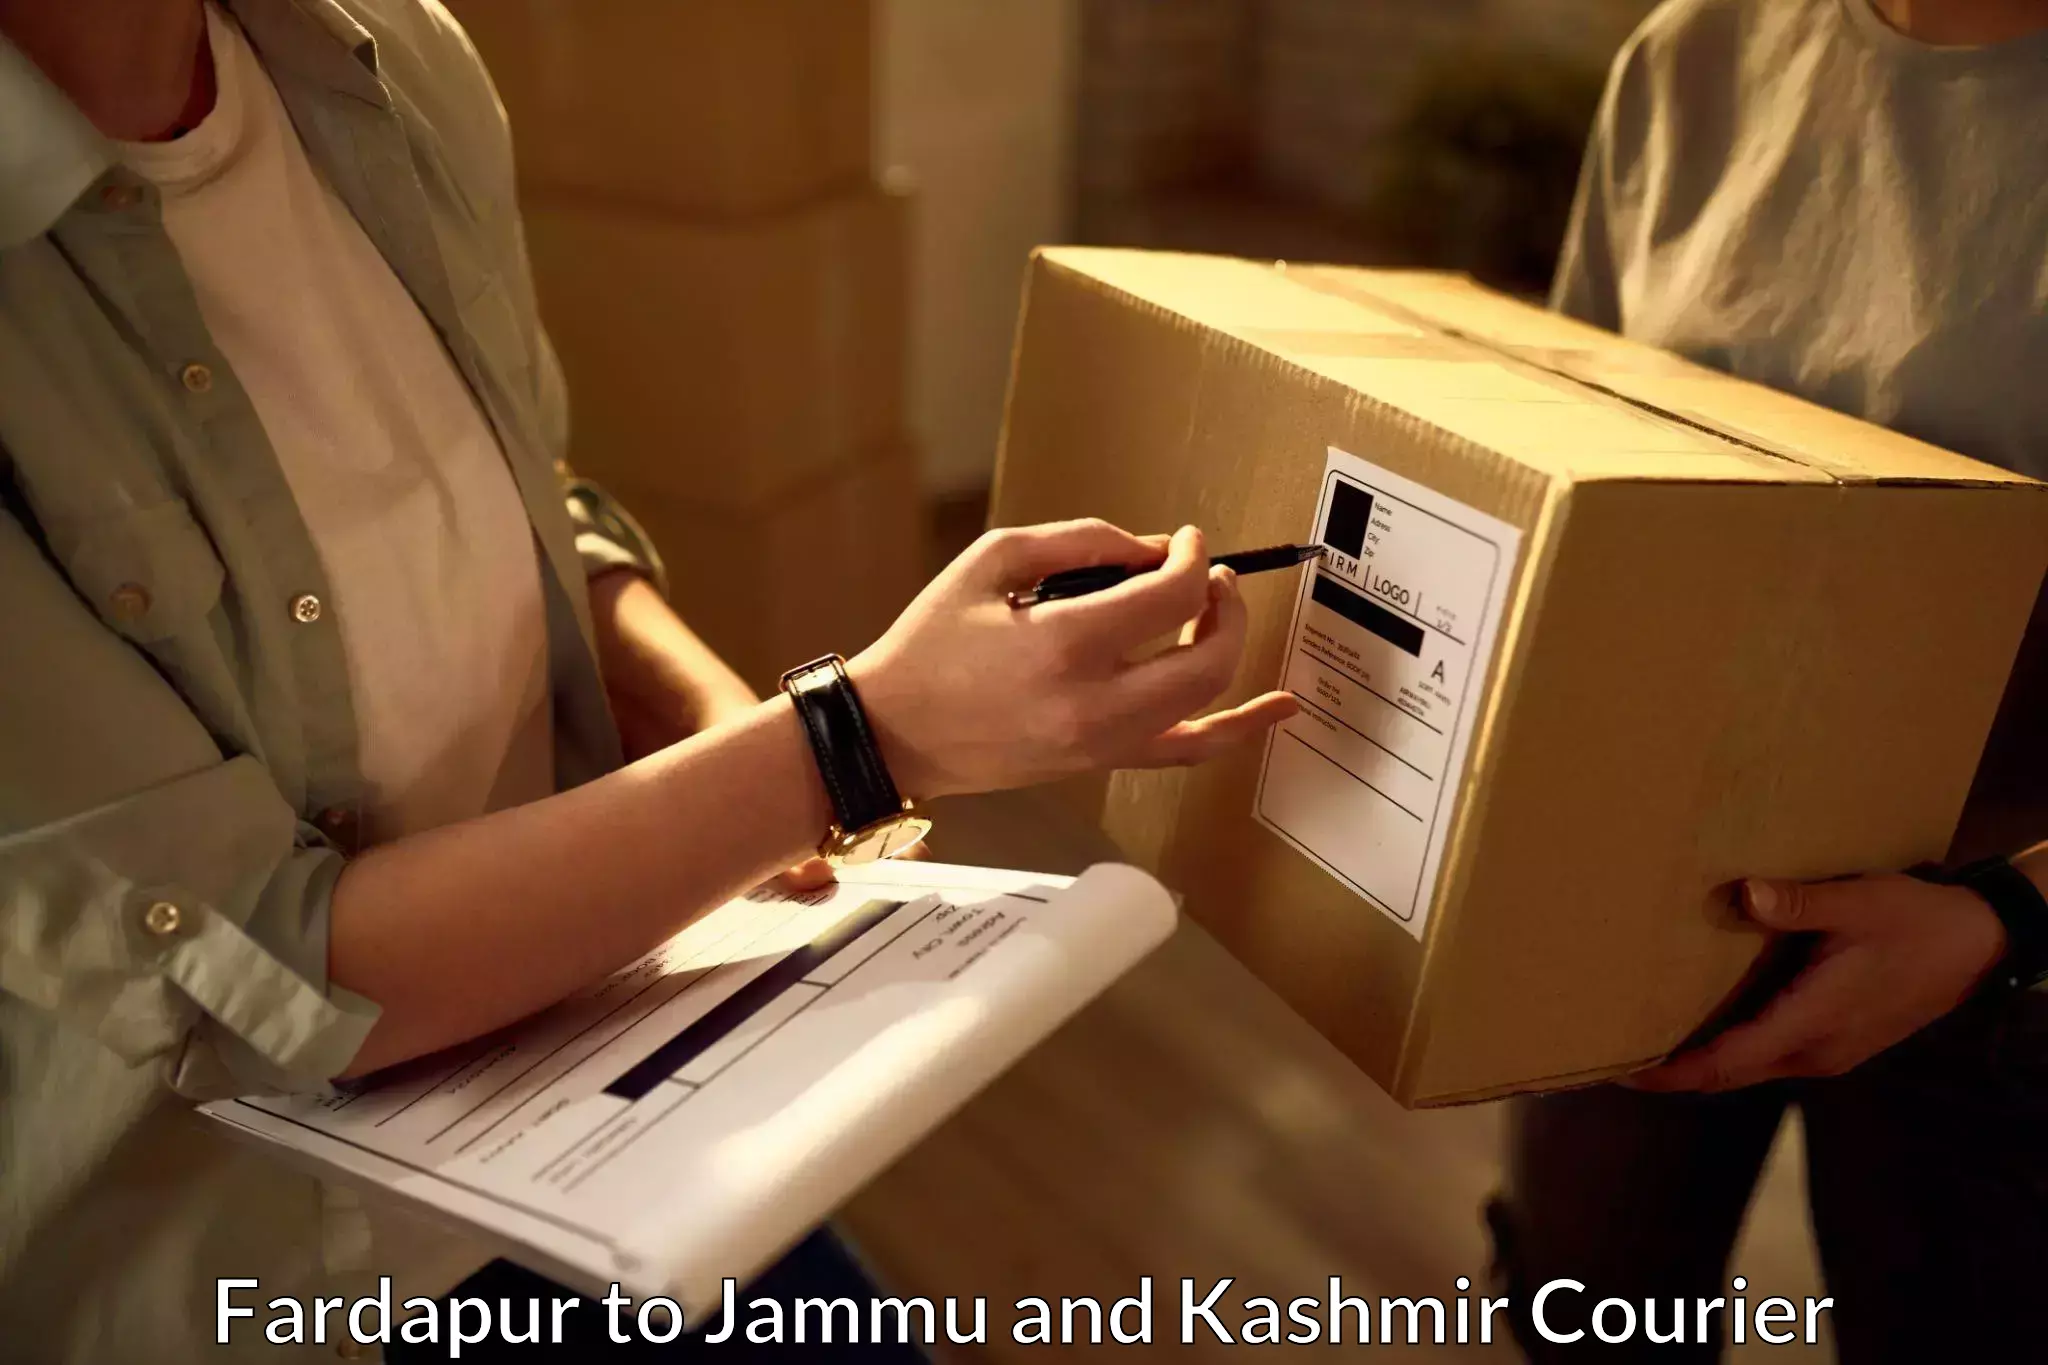 Doorstep delivery service Fardapur to Baramulla